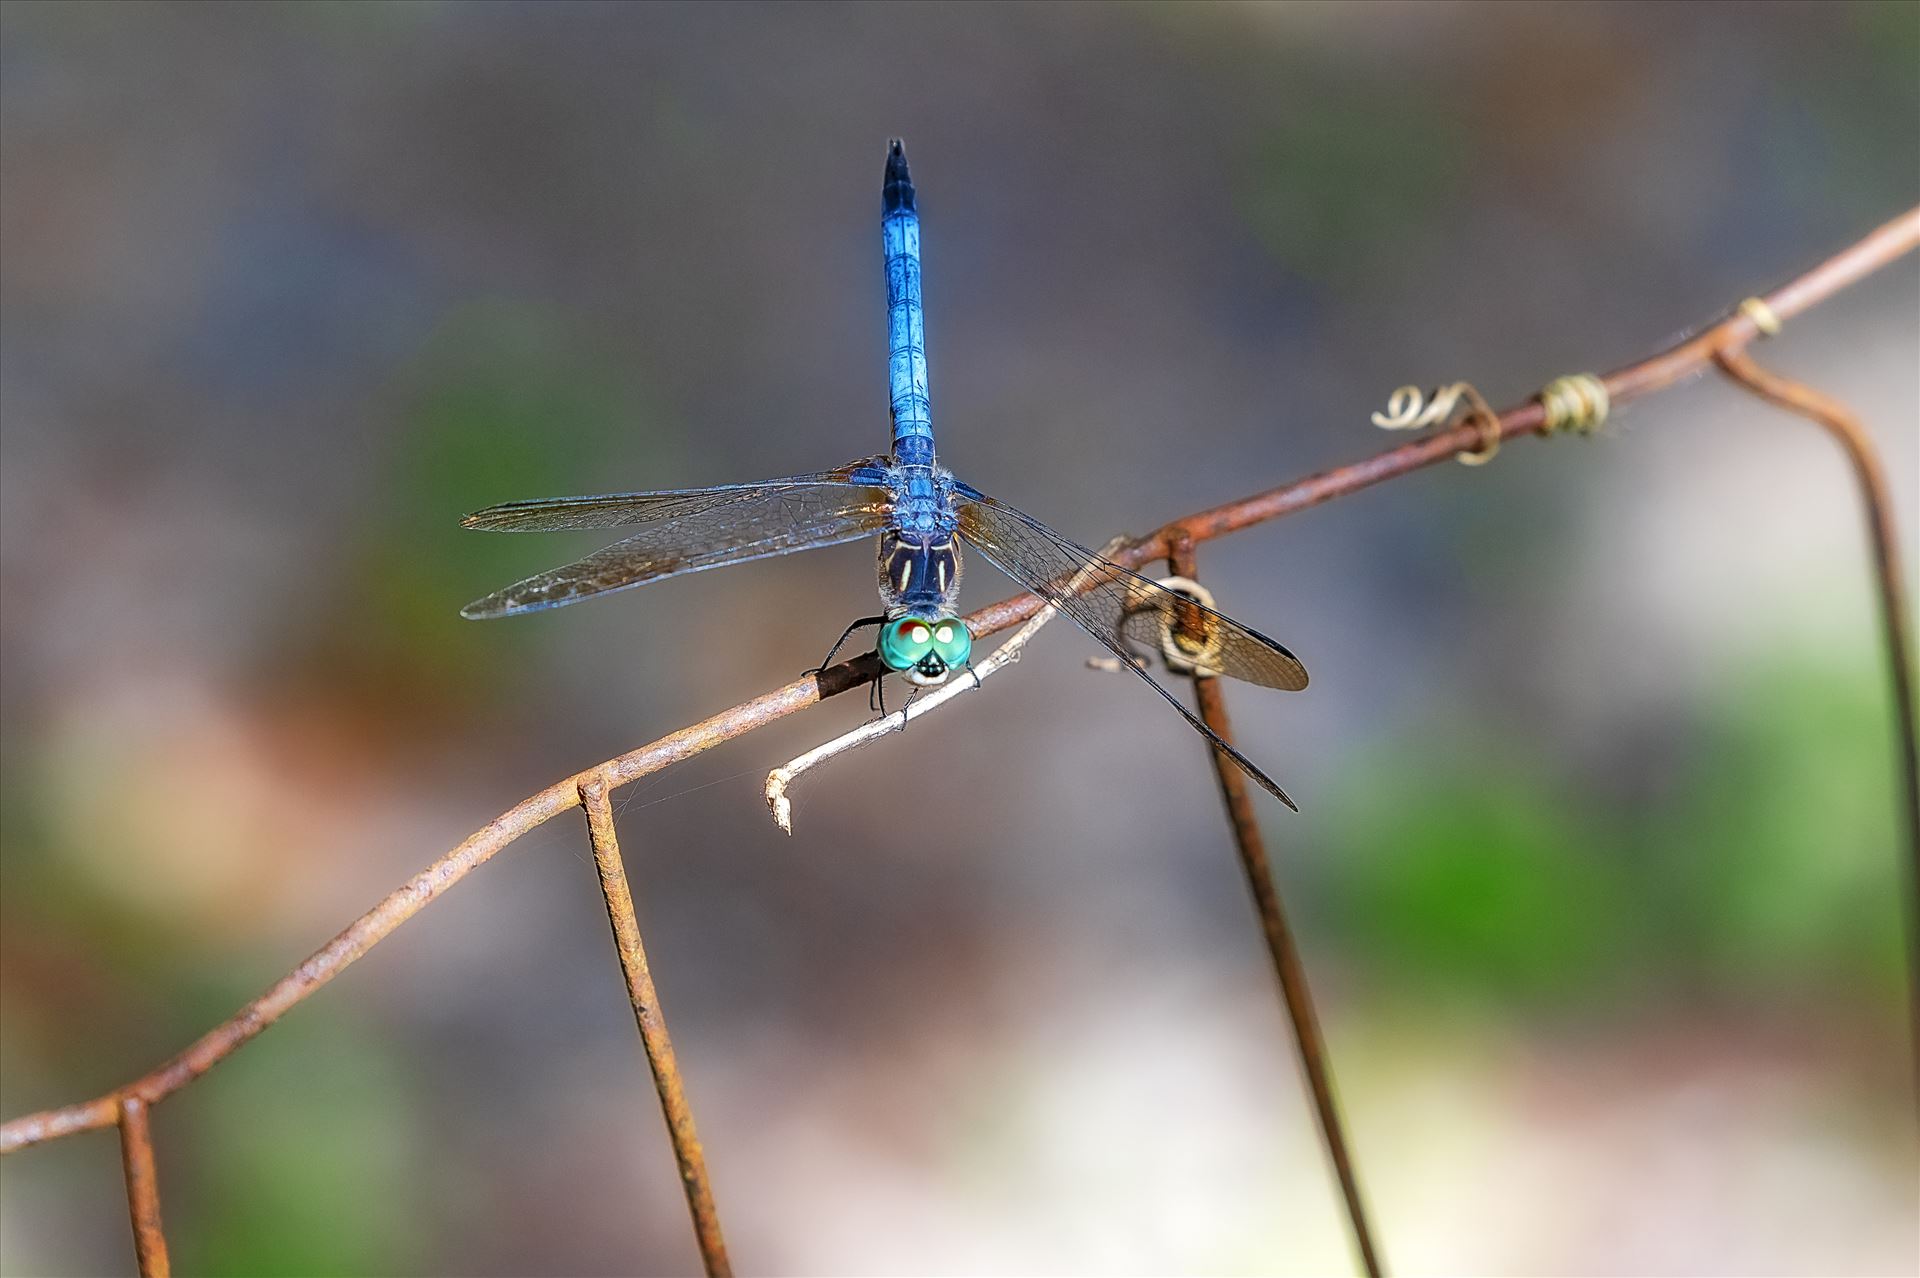 blue green dragonfly on rusted wire fence ss as sf 8500186.jpg -  by Terry Kelly Photography